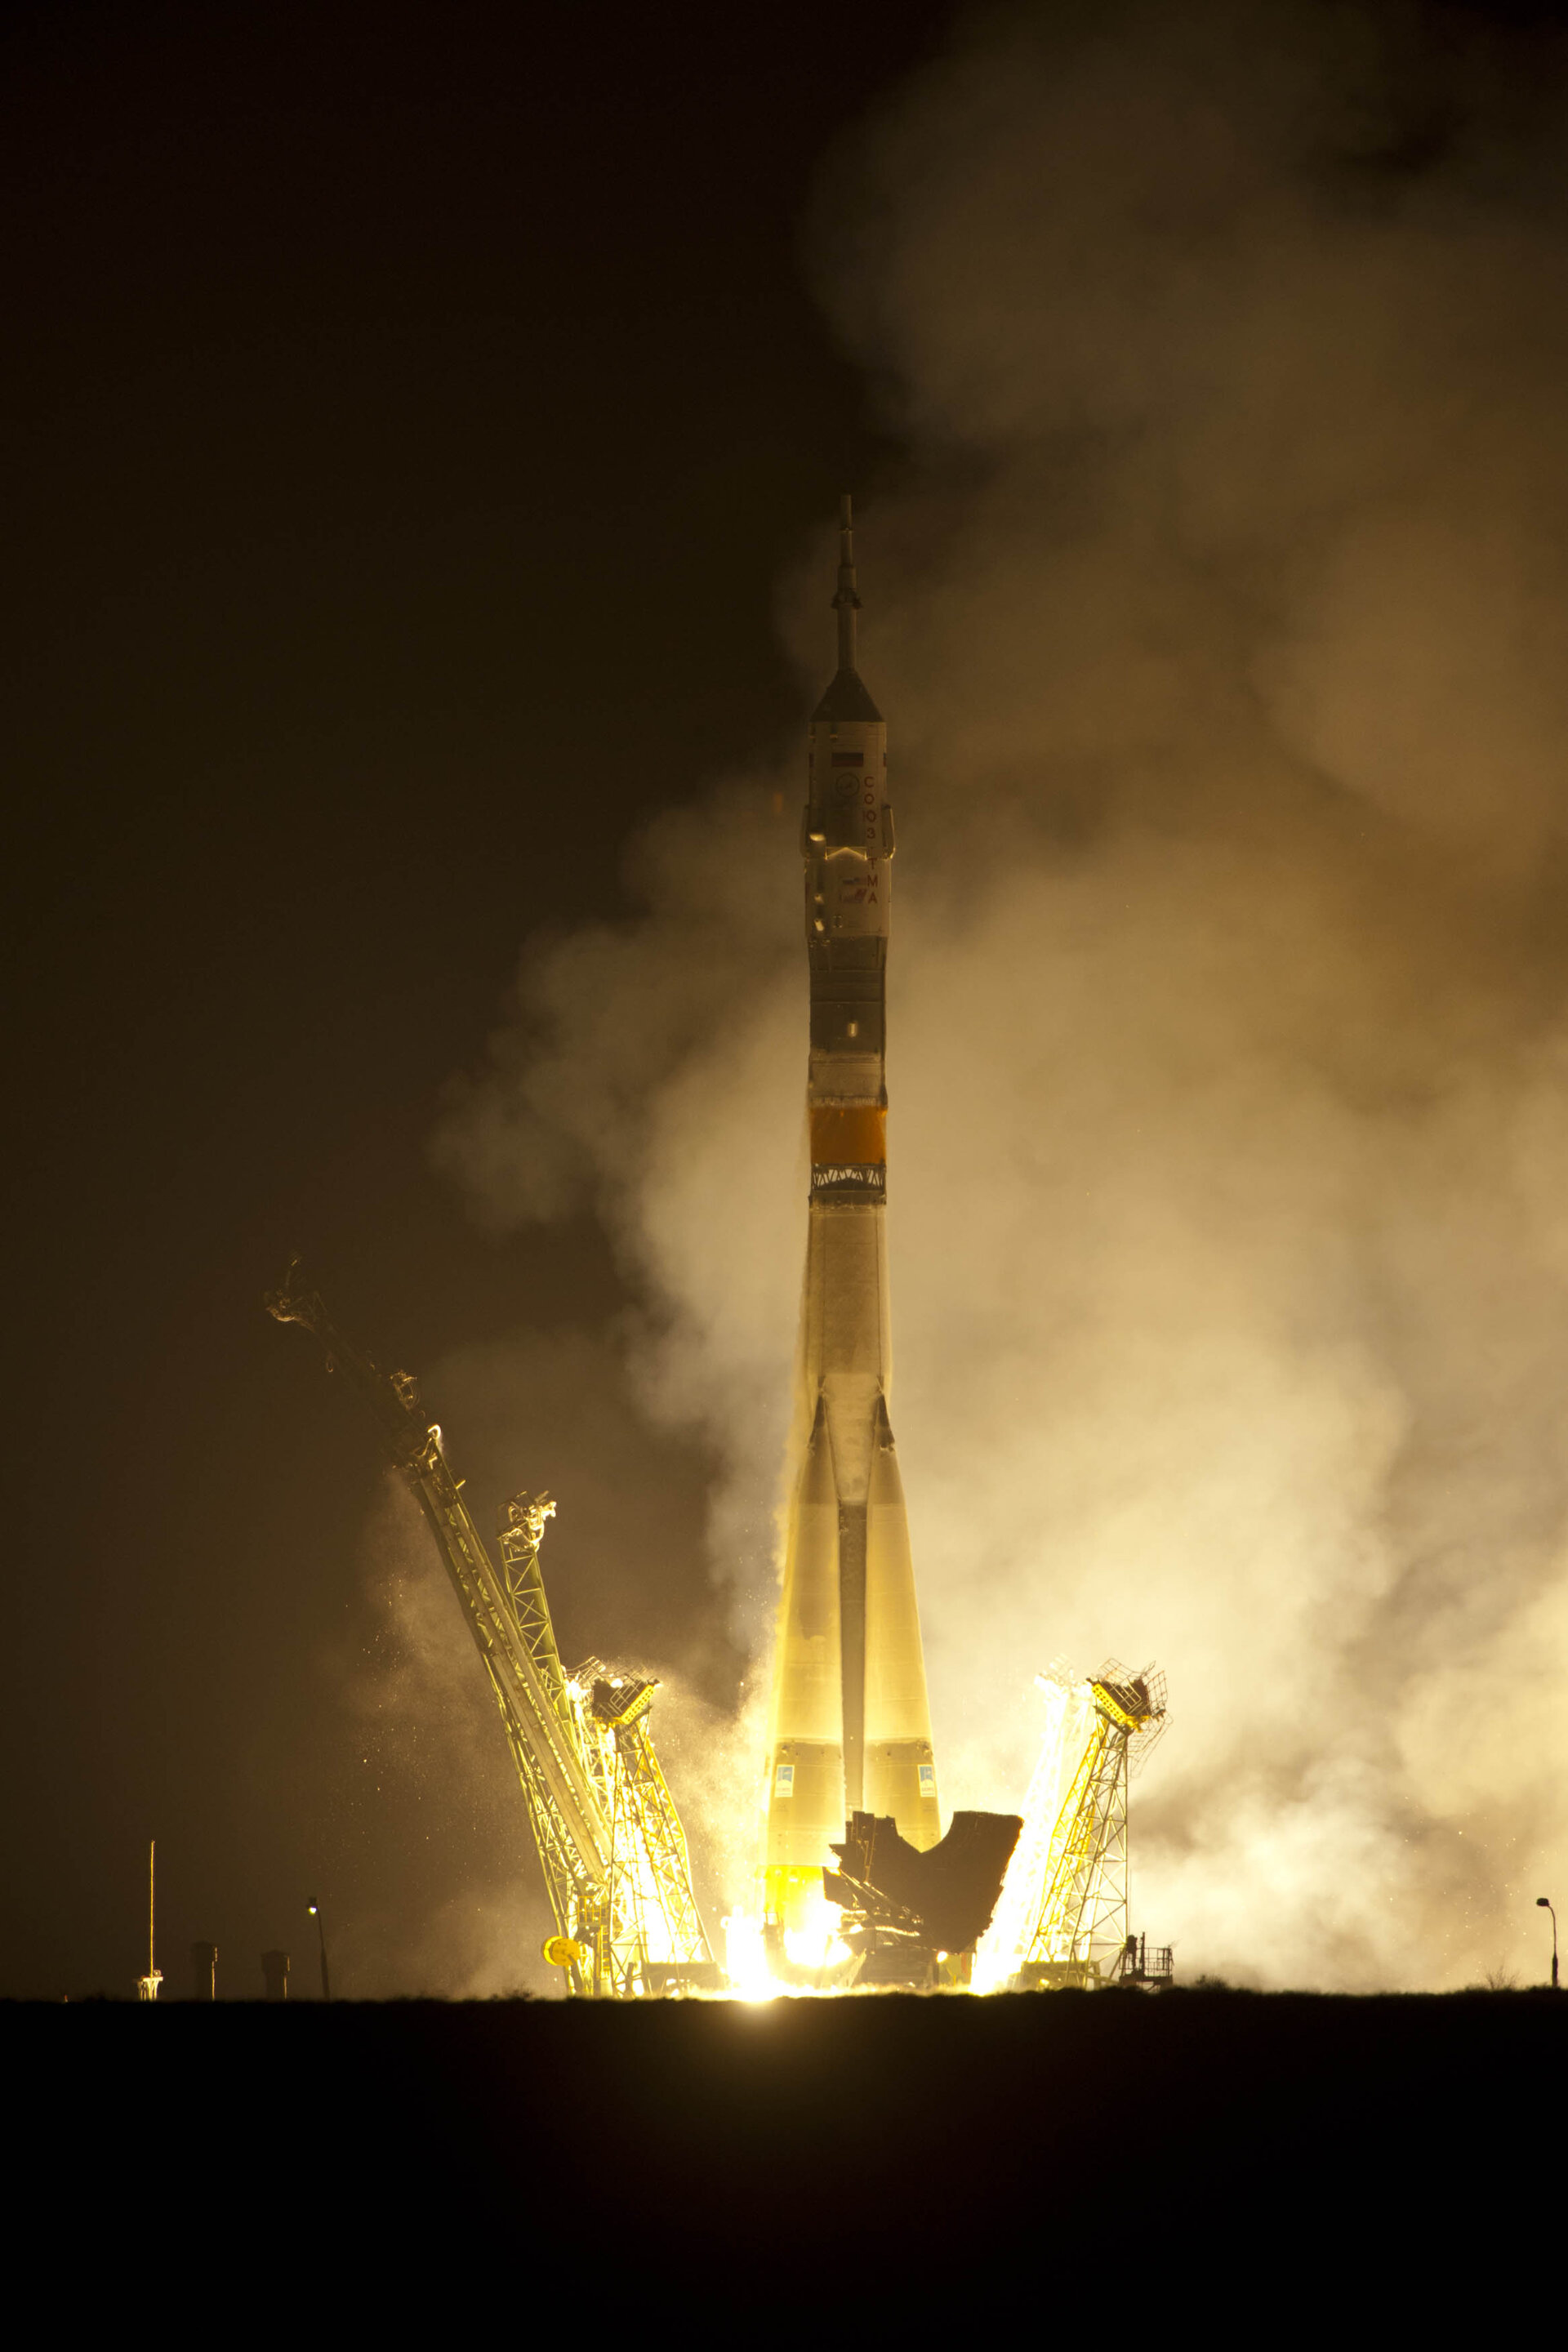 Soyuz TMA-20 was launched at 20:09:25